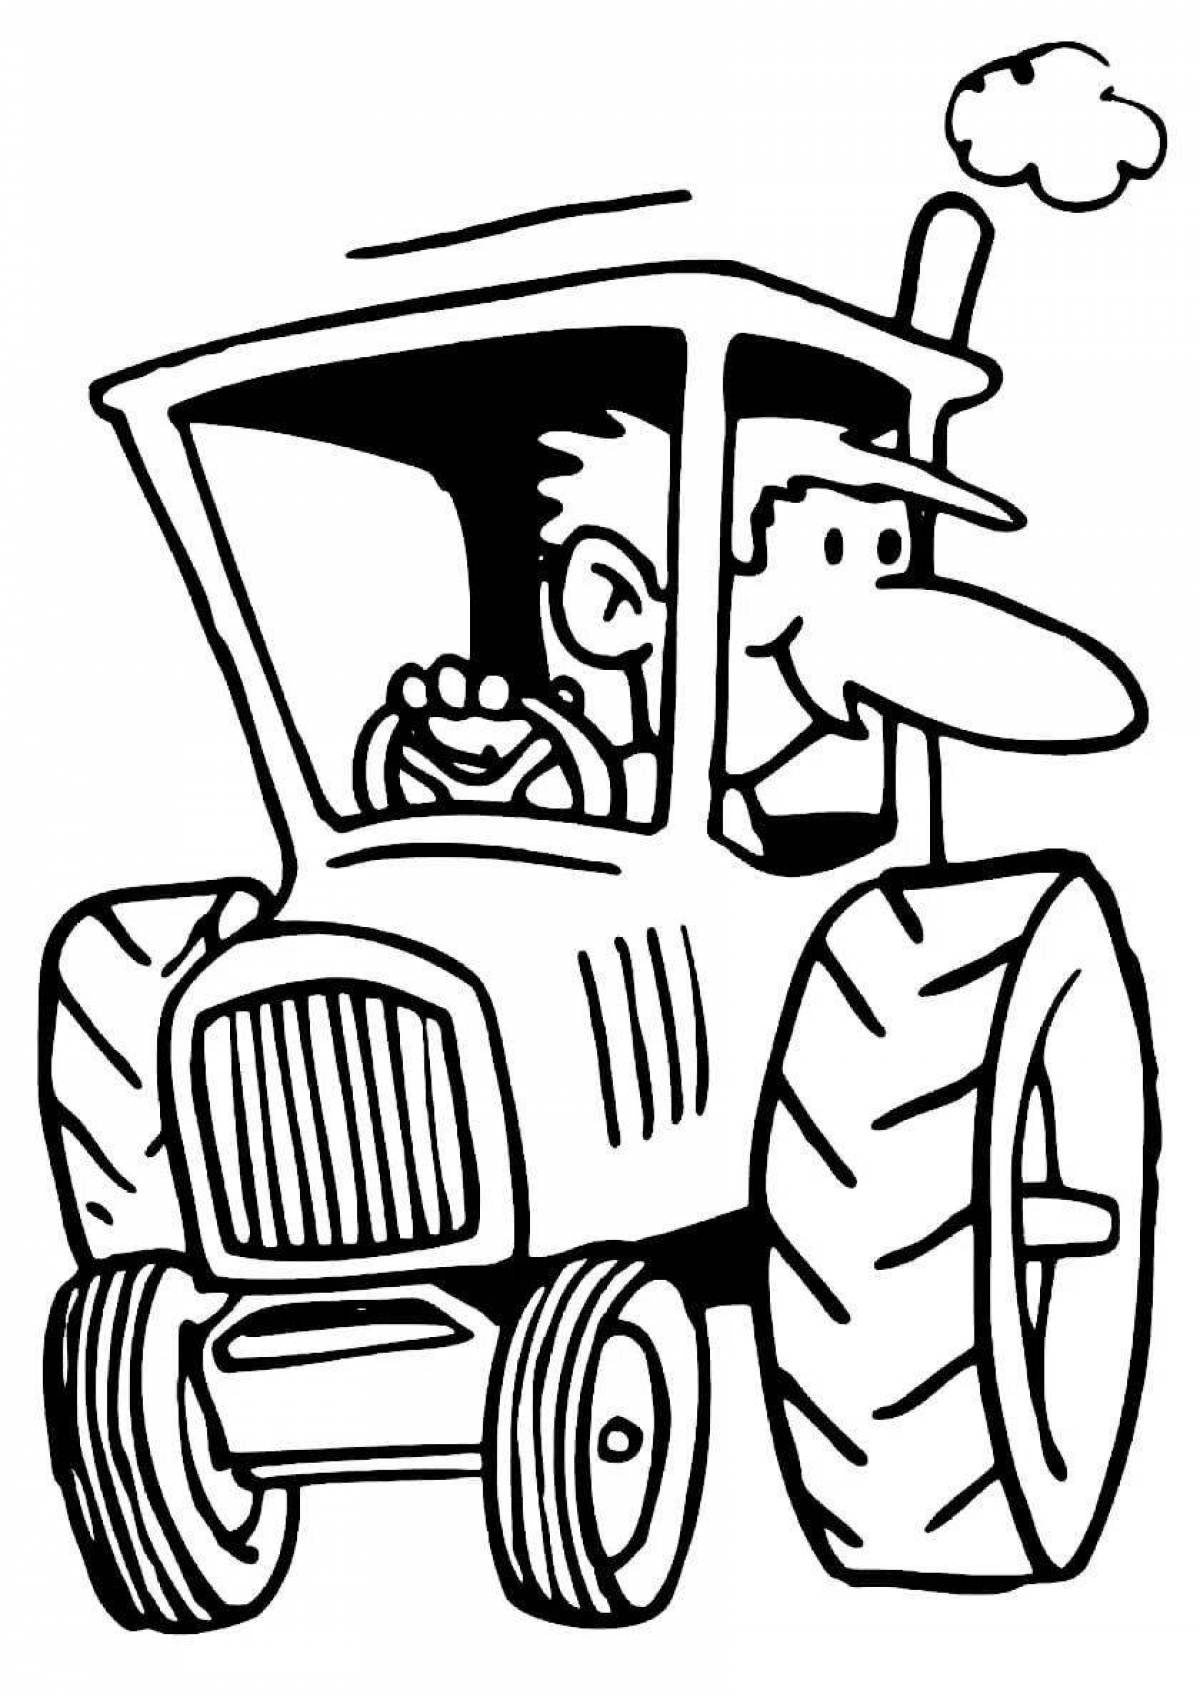 Adorable tractor drawing for kids